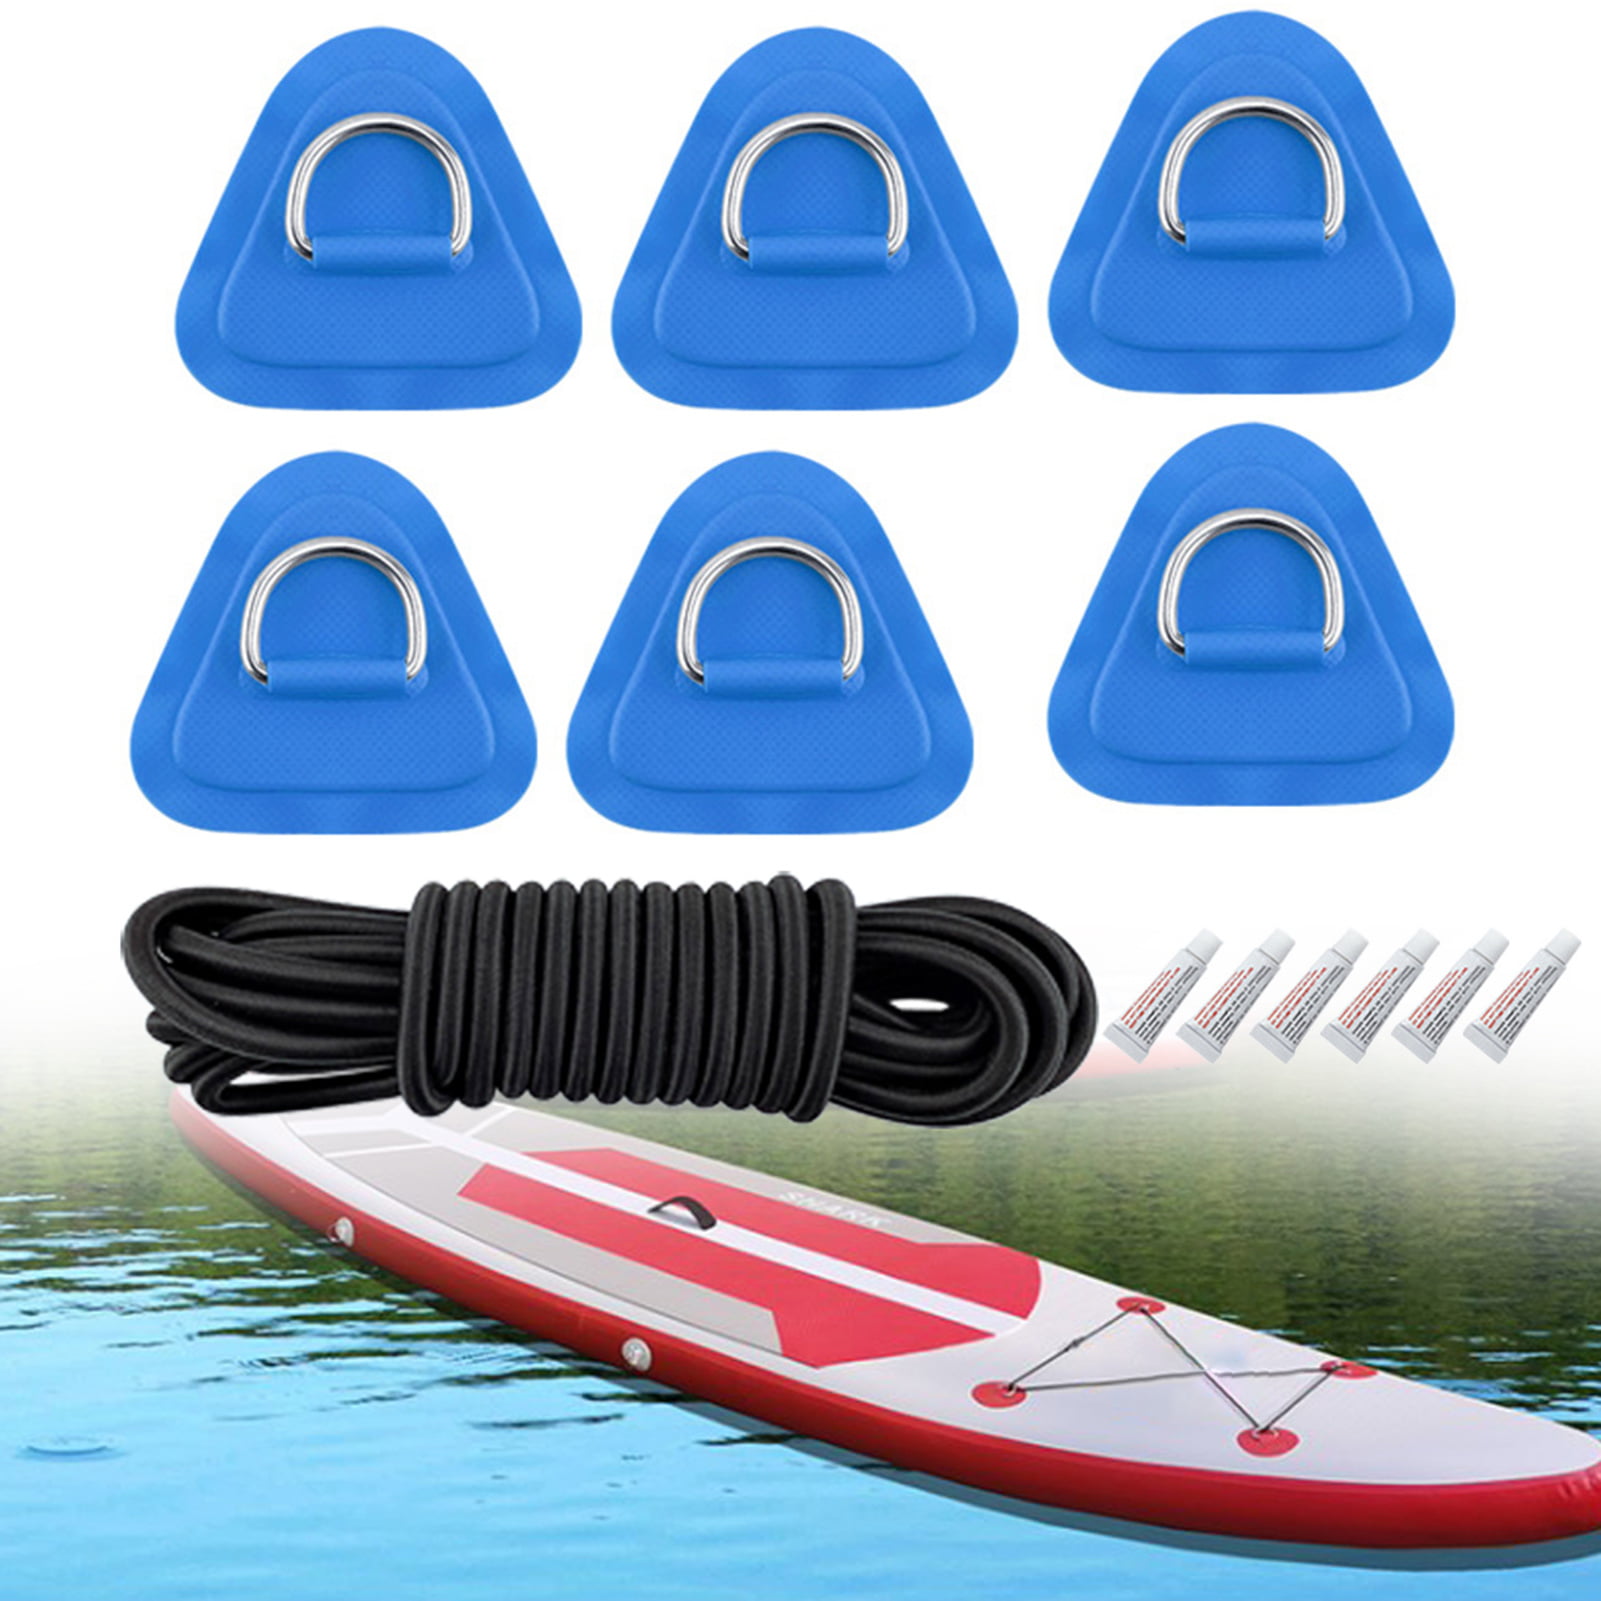 Bungee Deck Kit for Kayak Canoes Inflatable Boat Fishing Rigging Part 